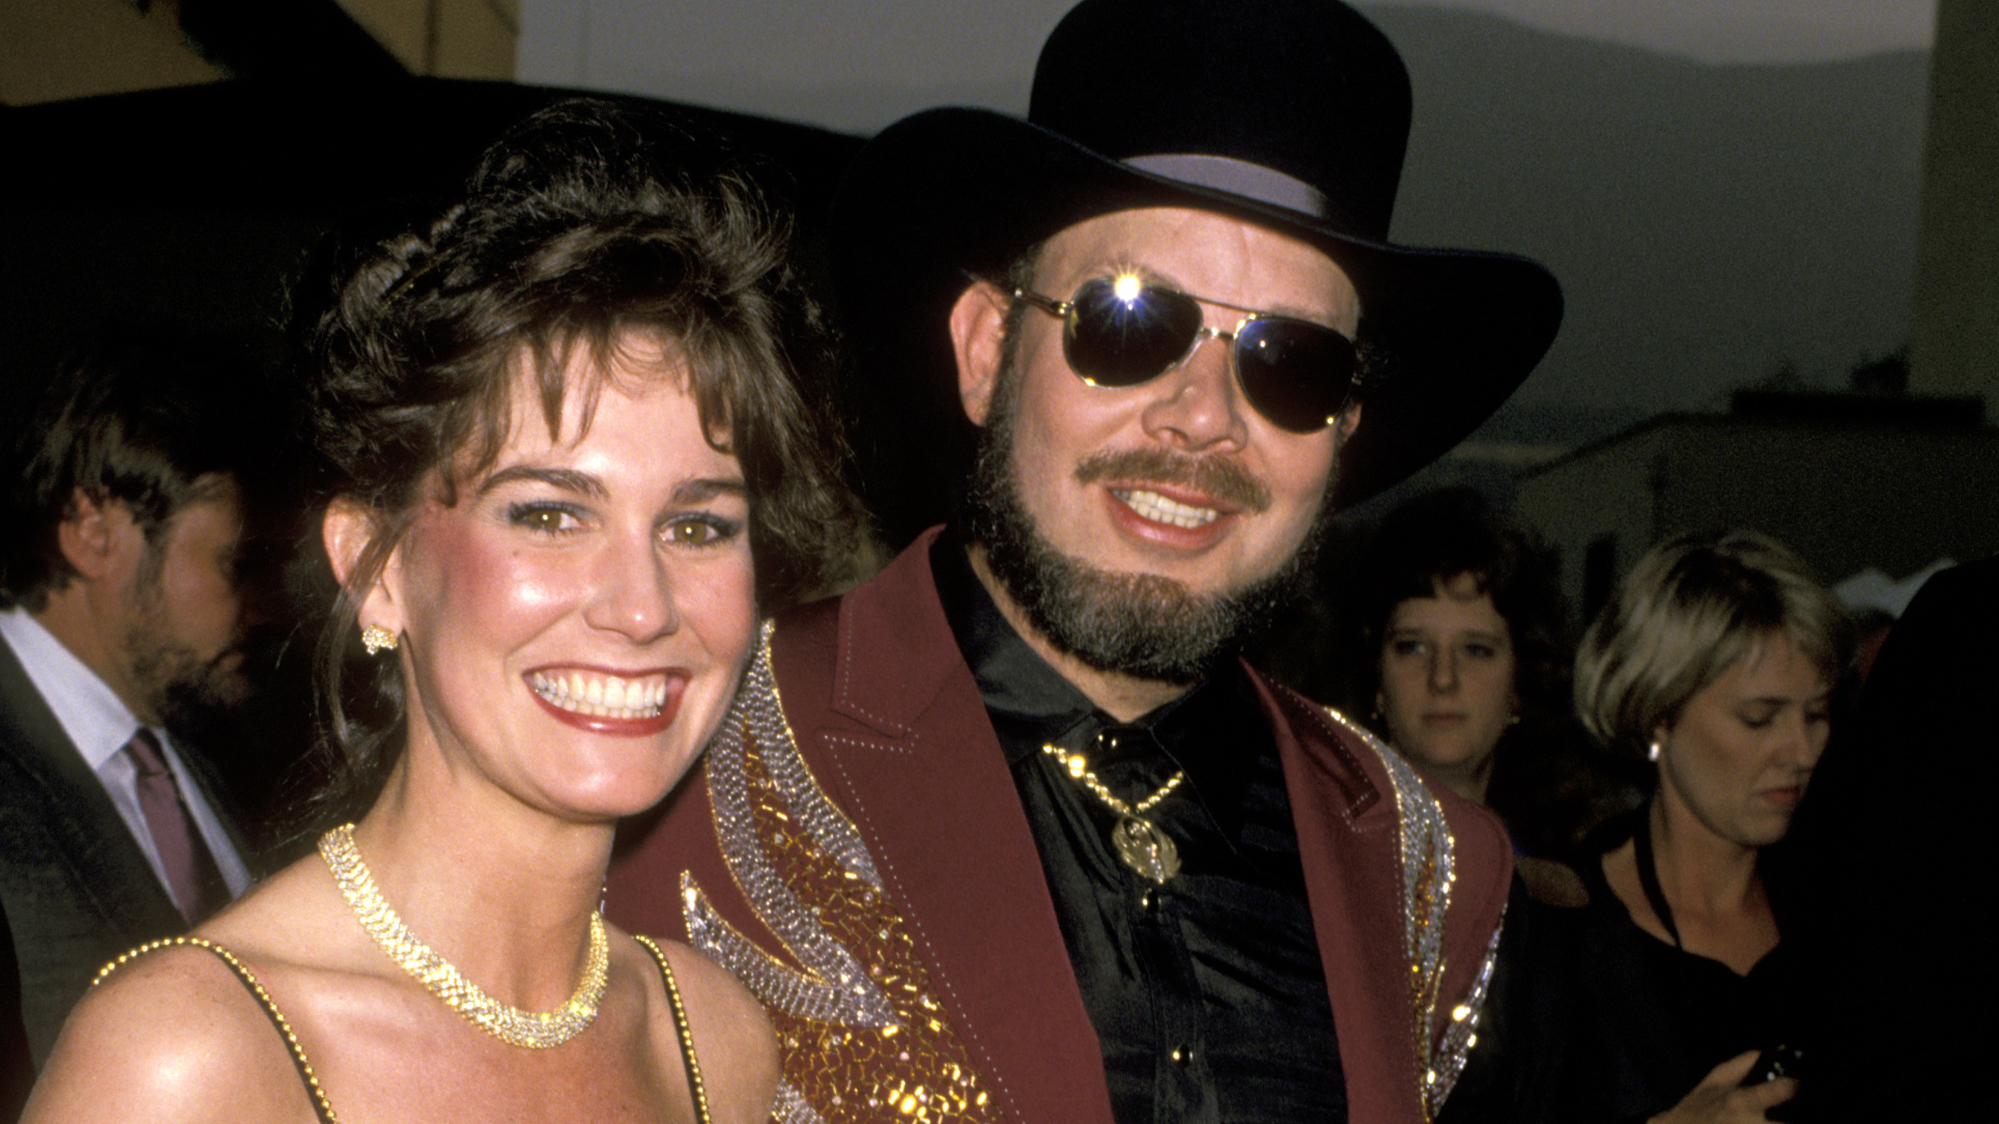 Hank Williams Jr. celebrates 48 years since his near-fatal accident, feeling incredibly blessed.